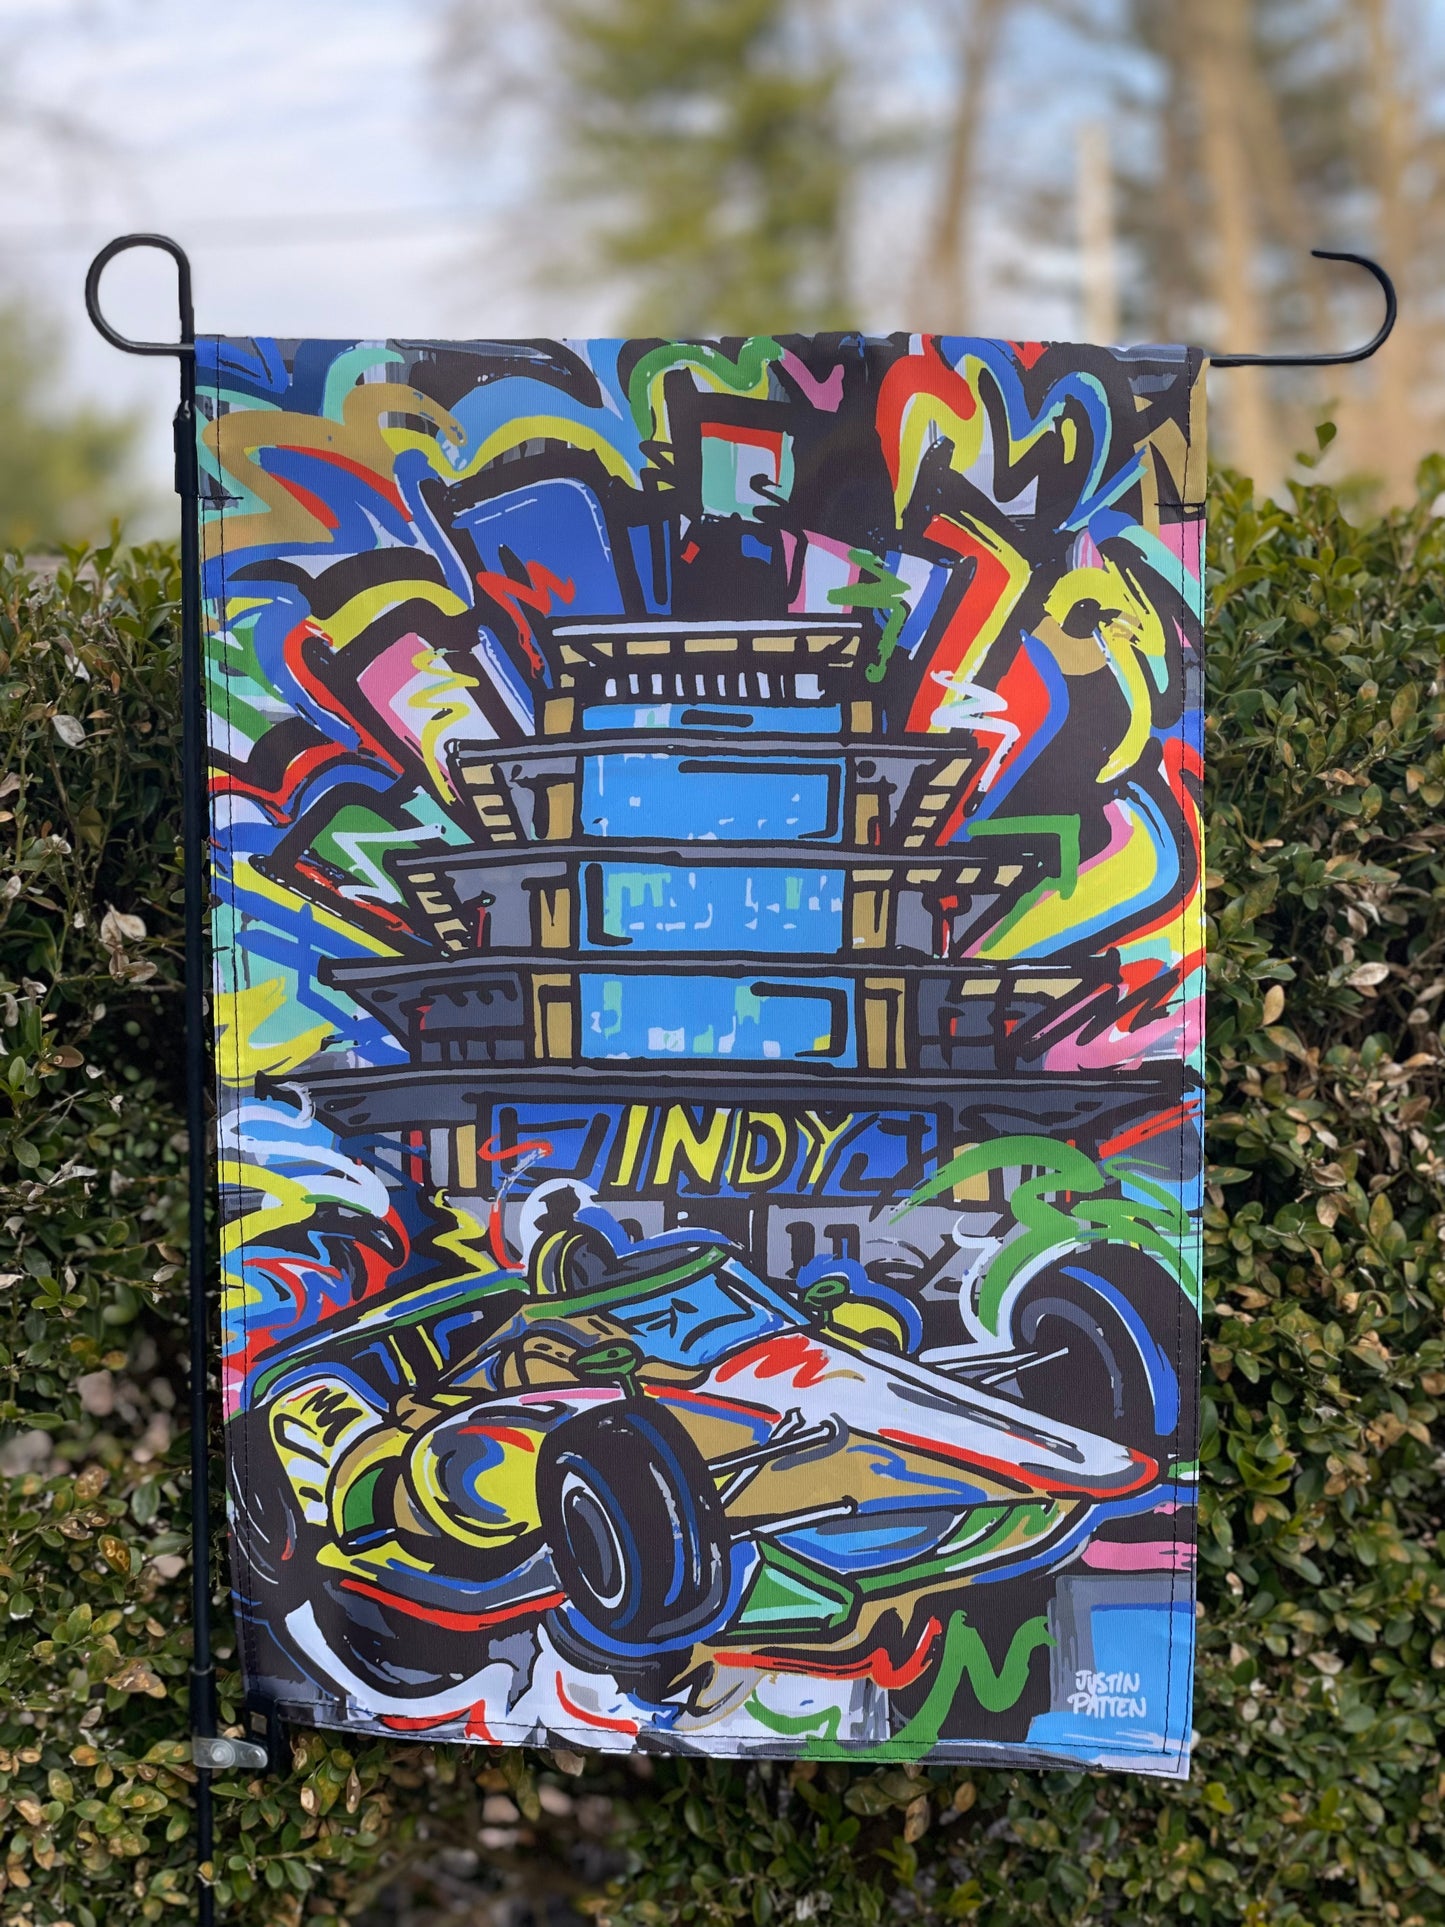 Indianapolis Motor Speedway Pagoda Garden Flag (12”x18” in.) by Justin Patten